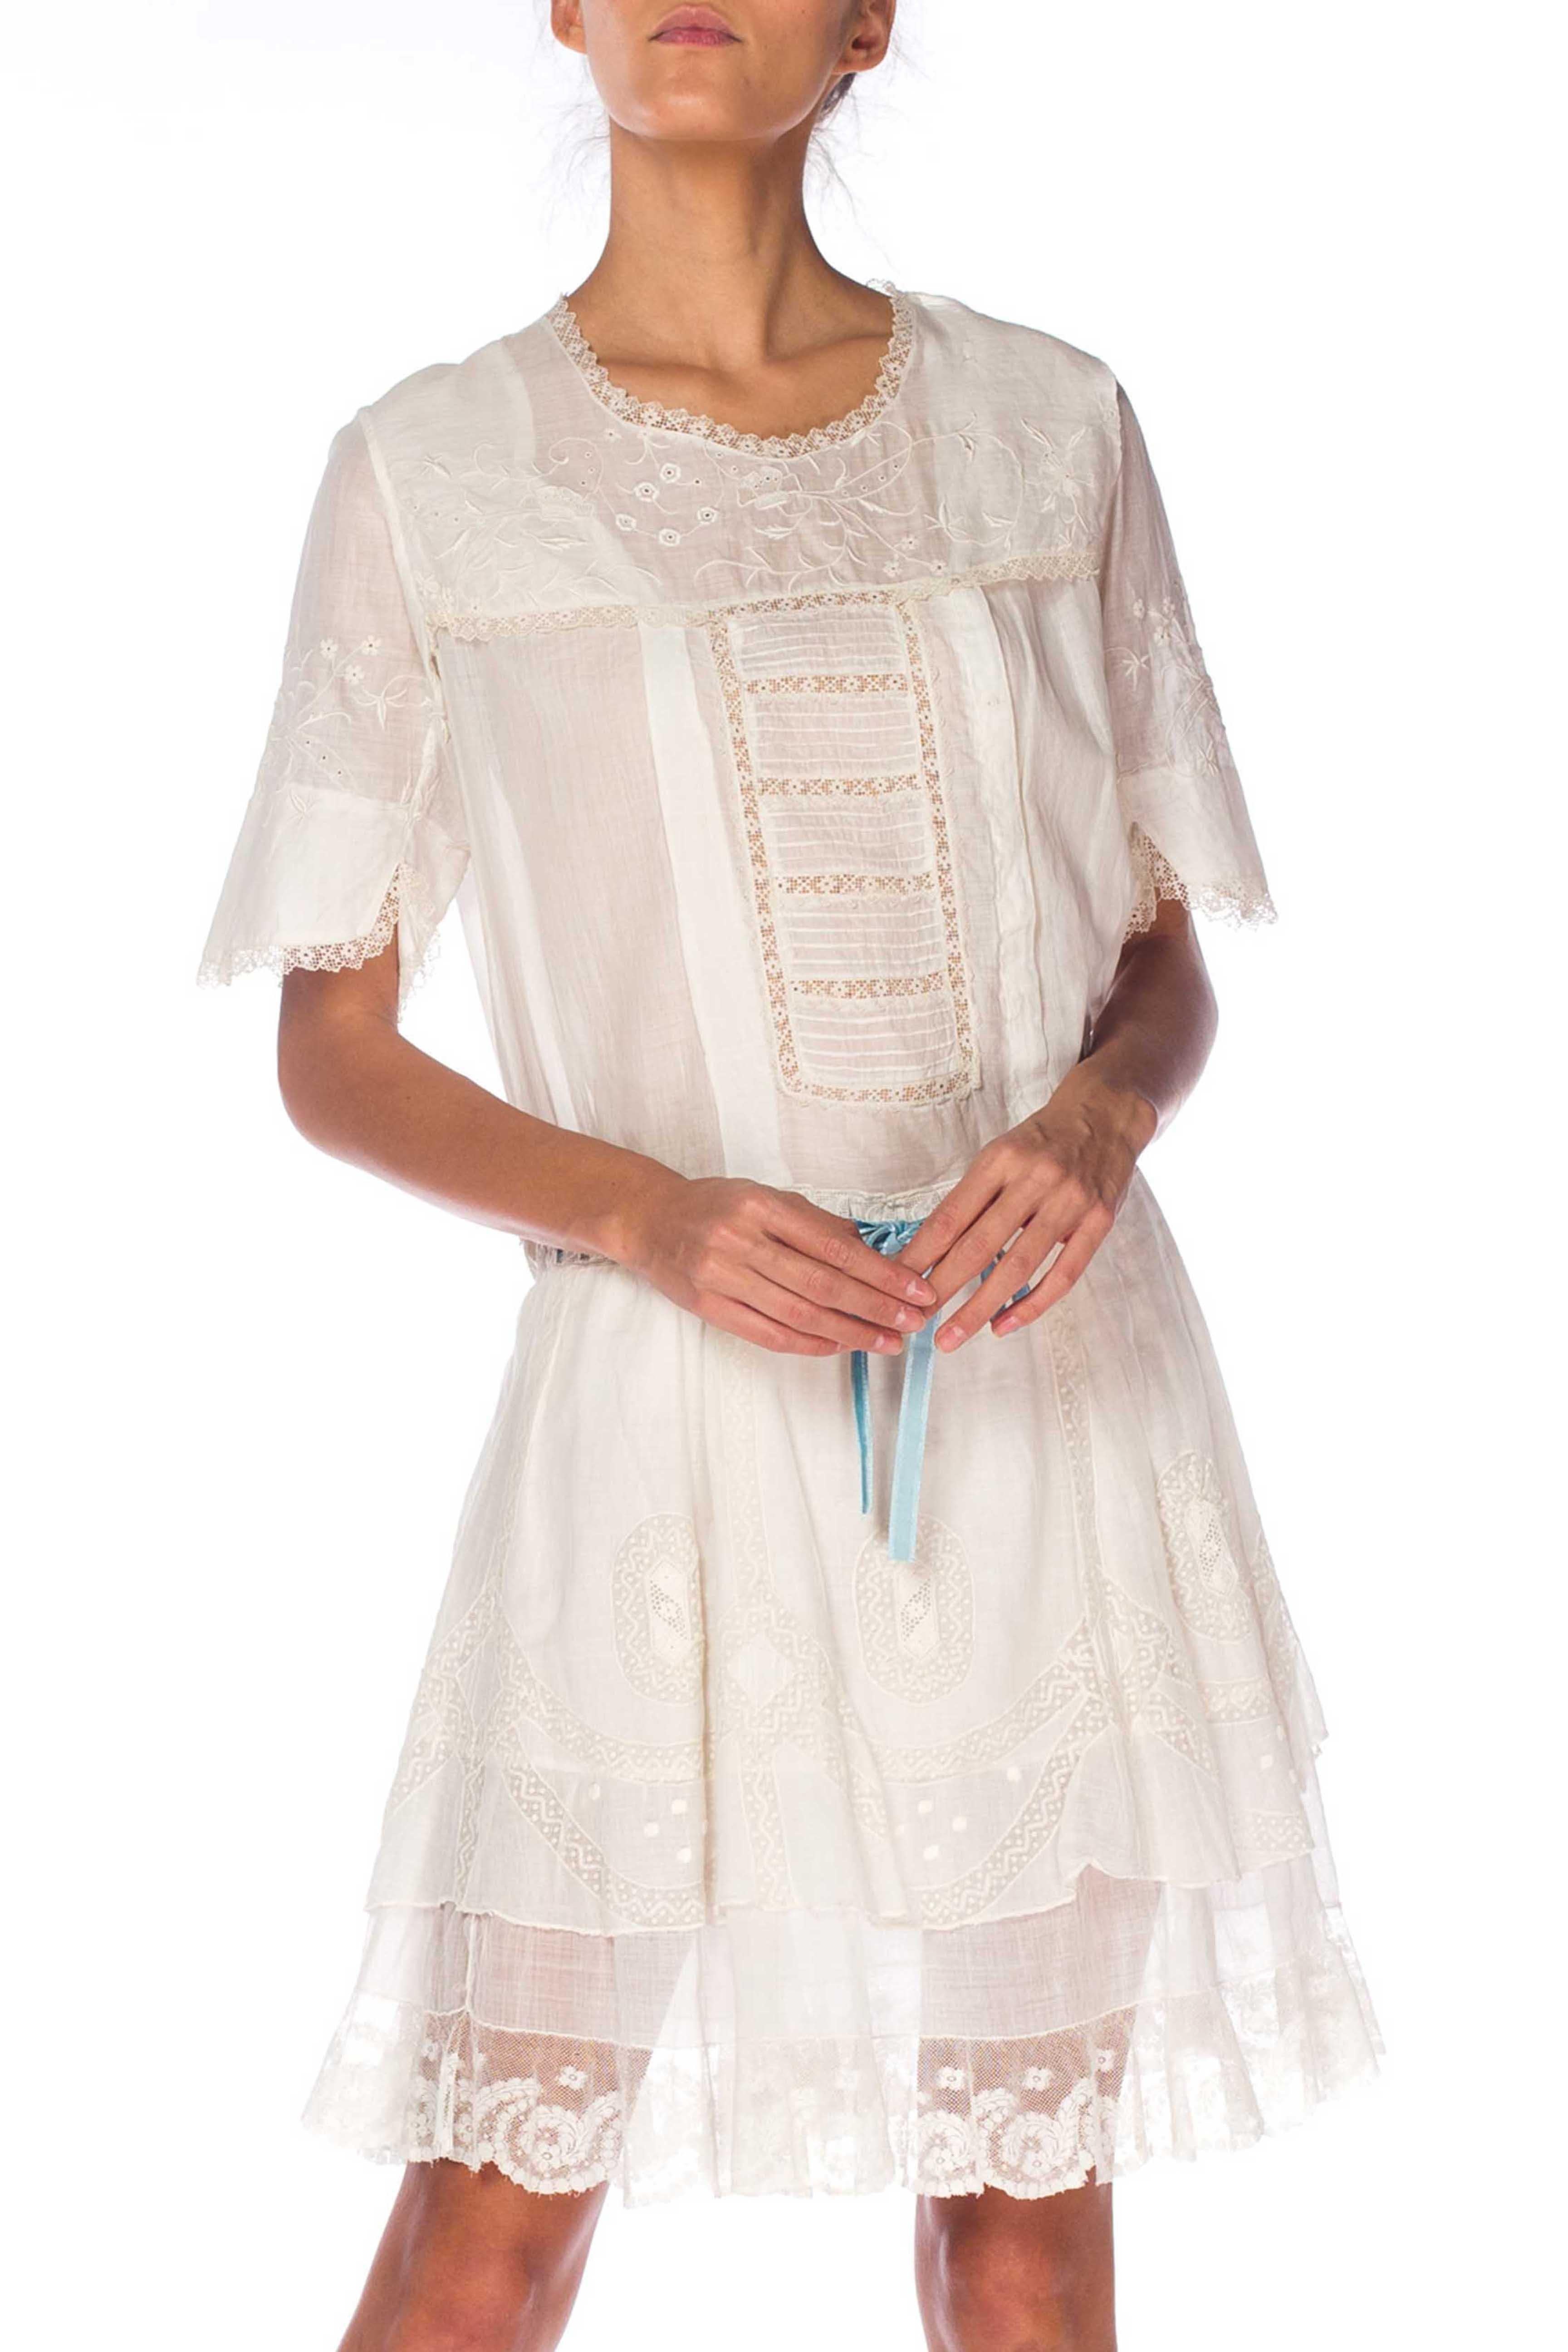 Edwardian White Hand Embroidered Organic Cotton Voile Young Girls Dress With La For Sale 3